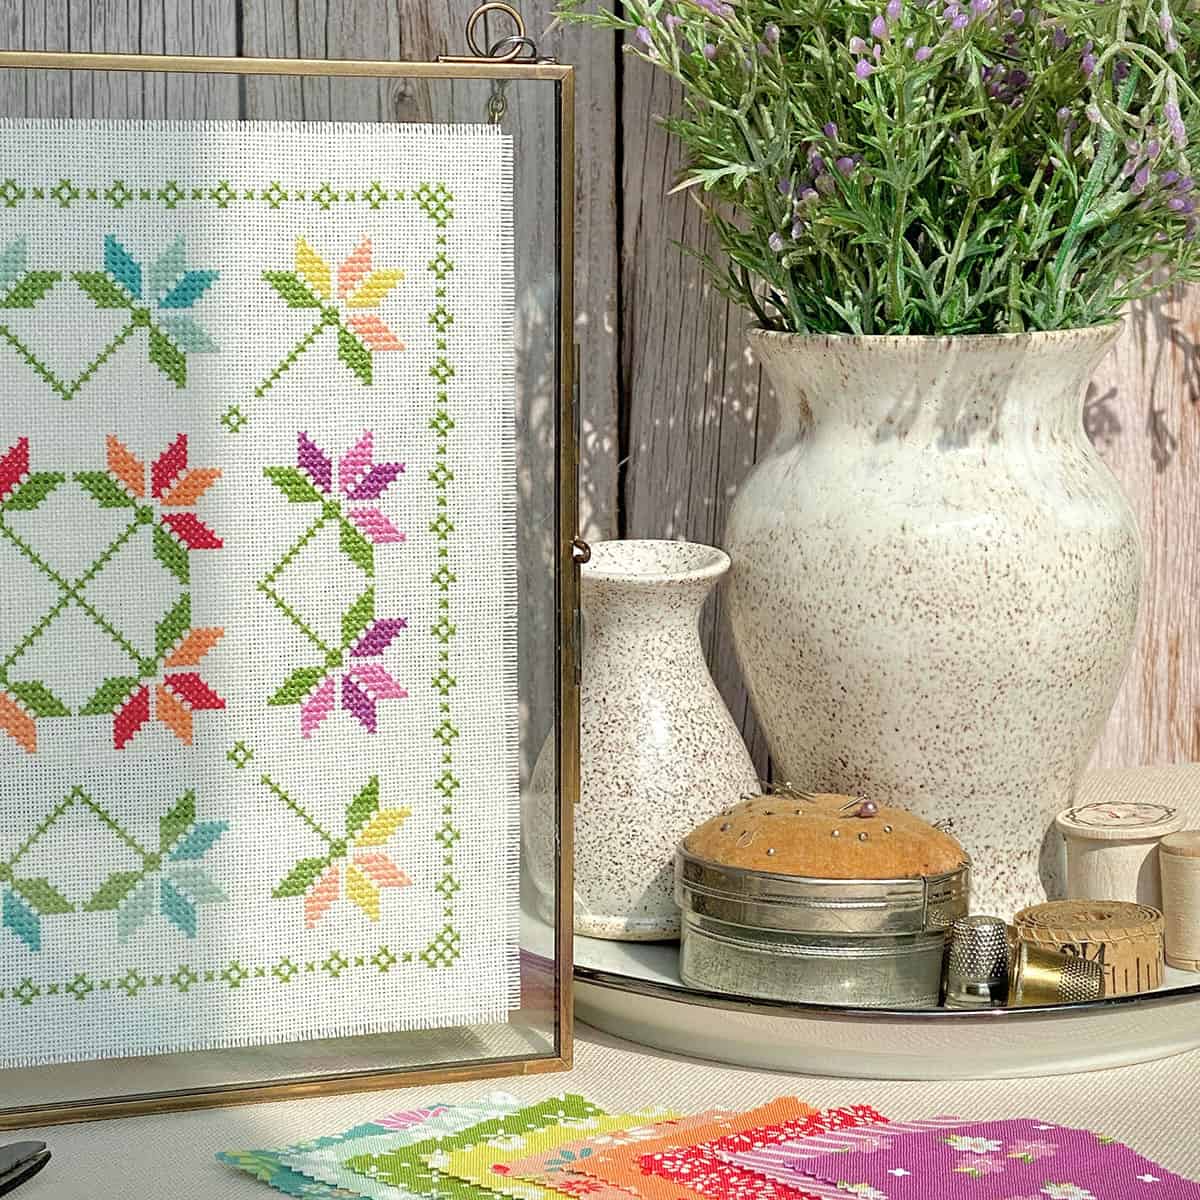 Cross Stitch patchwork in frame in bright spring colors